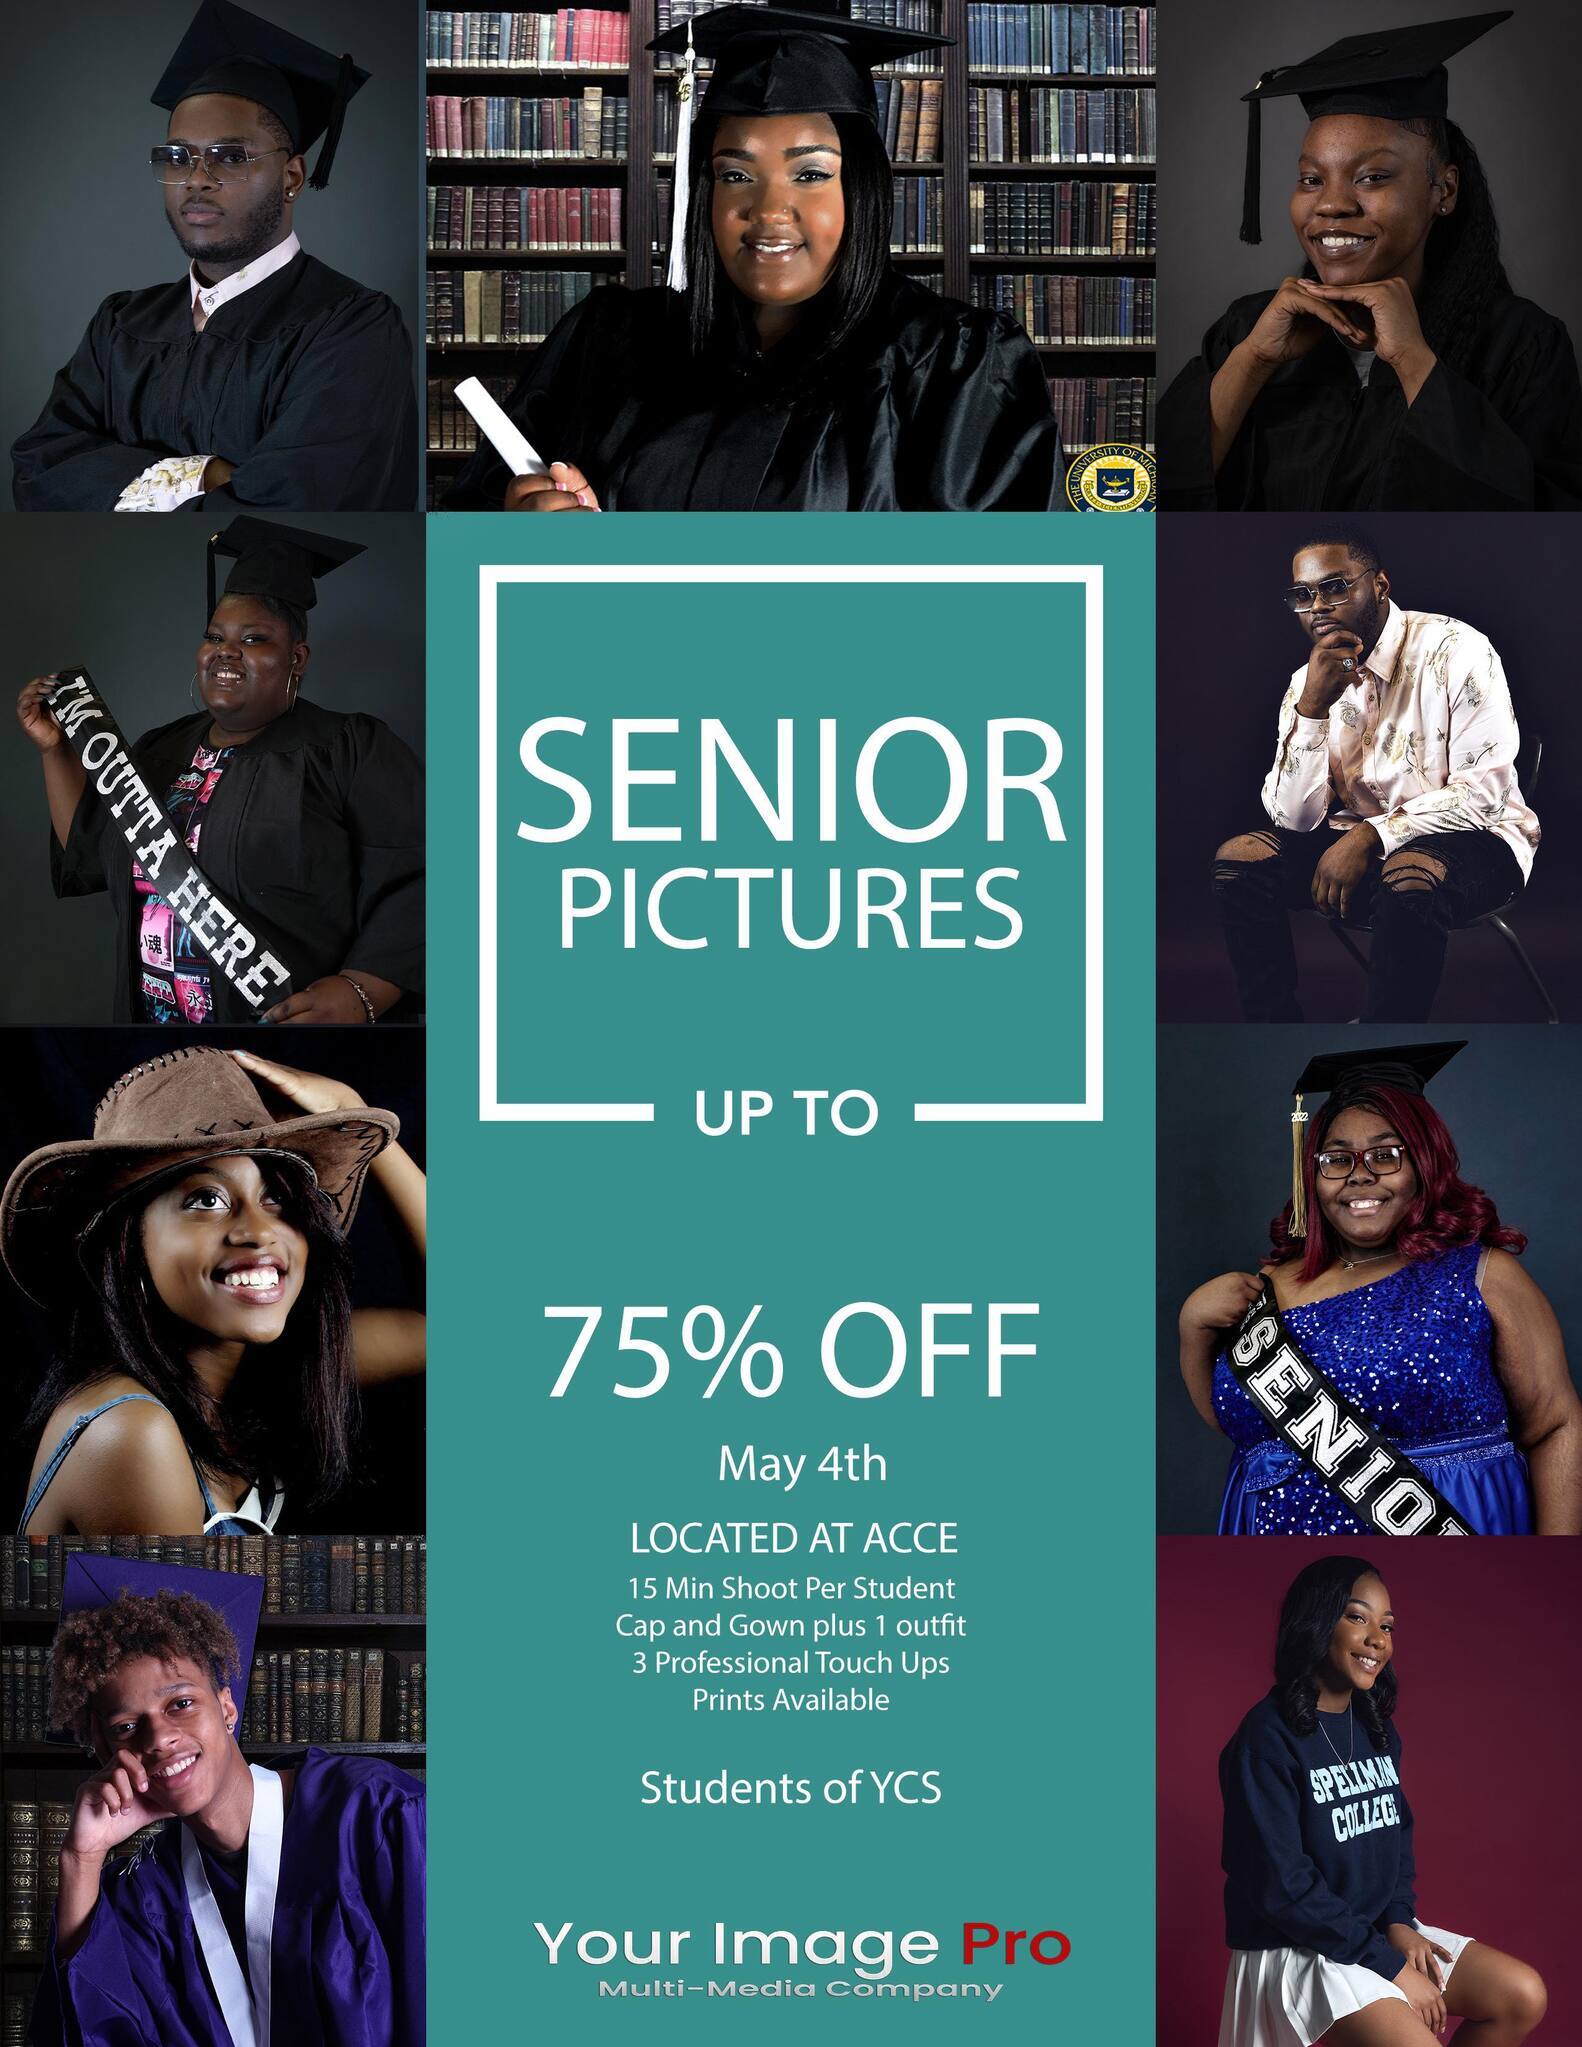 Senior Pictures at ACCE - May 4th - up to 75% off, 15 minute shoot per person, cap and gown + 1 outfit, 3 professional touch ups, prints available, students of YCS only! Your Image Pro LLC is providing these images, contact them for more info! 